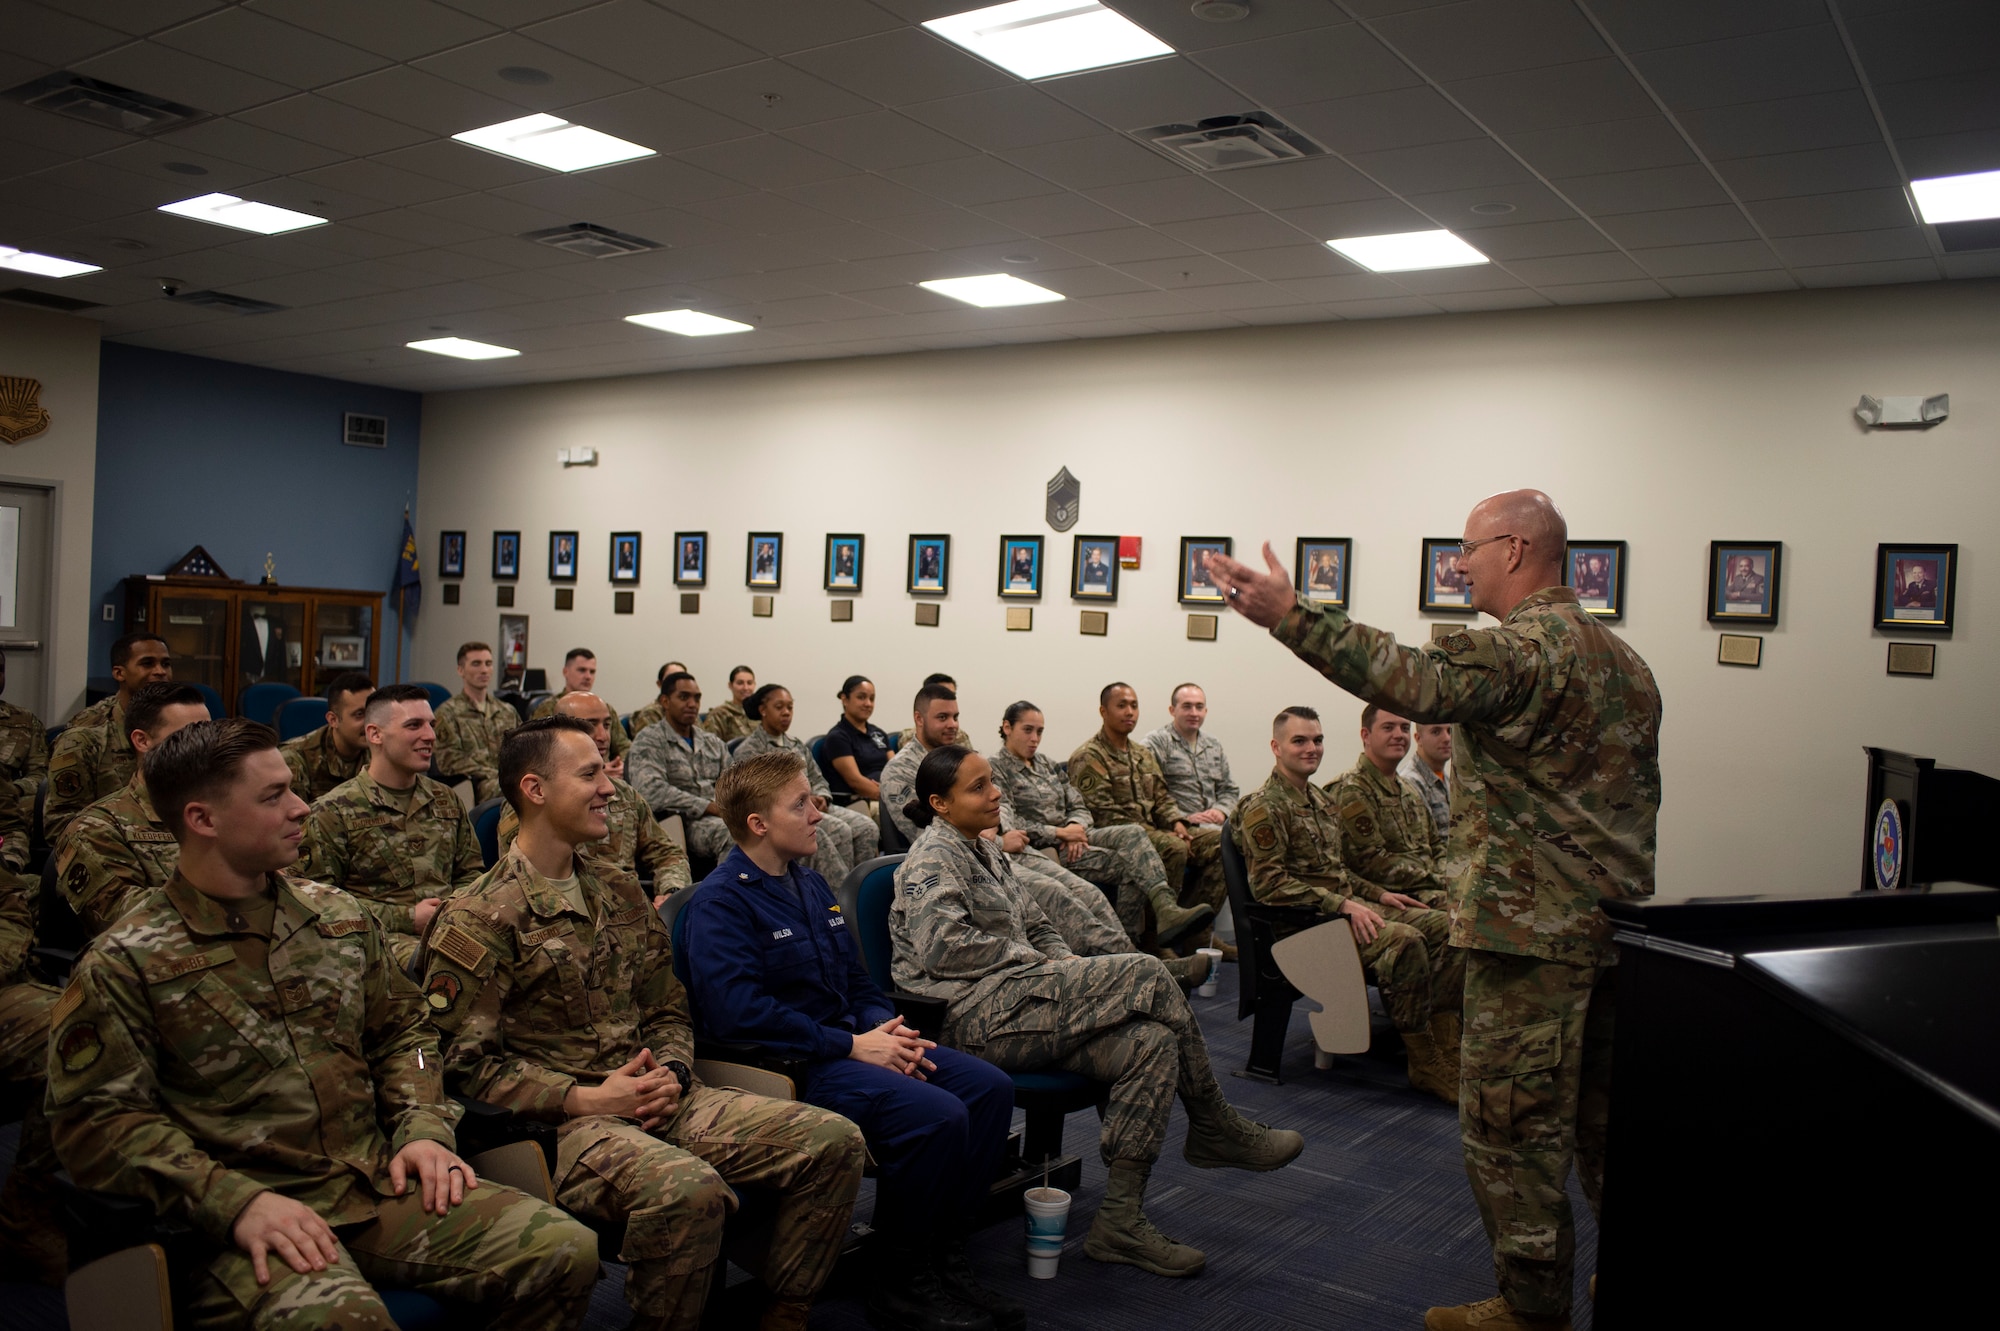 Chief Master Sgt. Daniel Simpson, the 18th Air Force command chief, speaks to an airman leadership school class during a tour at MacDill Air Force Base Fla., Jan. 29-31, 2020.